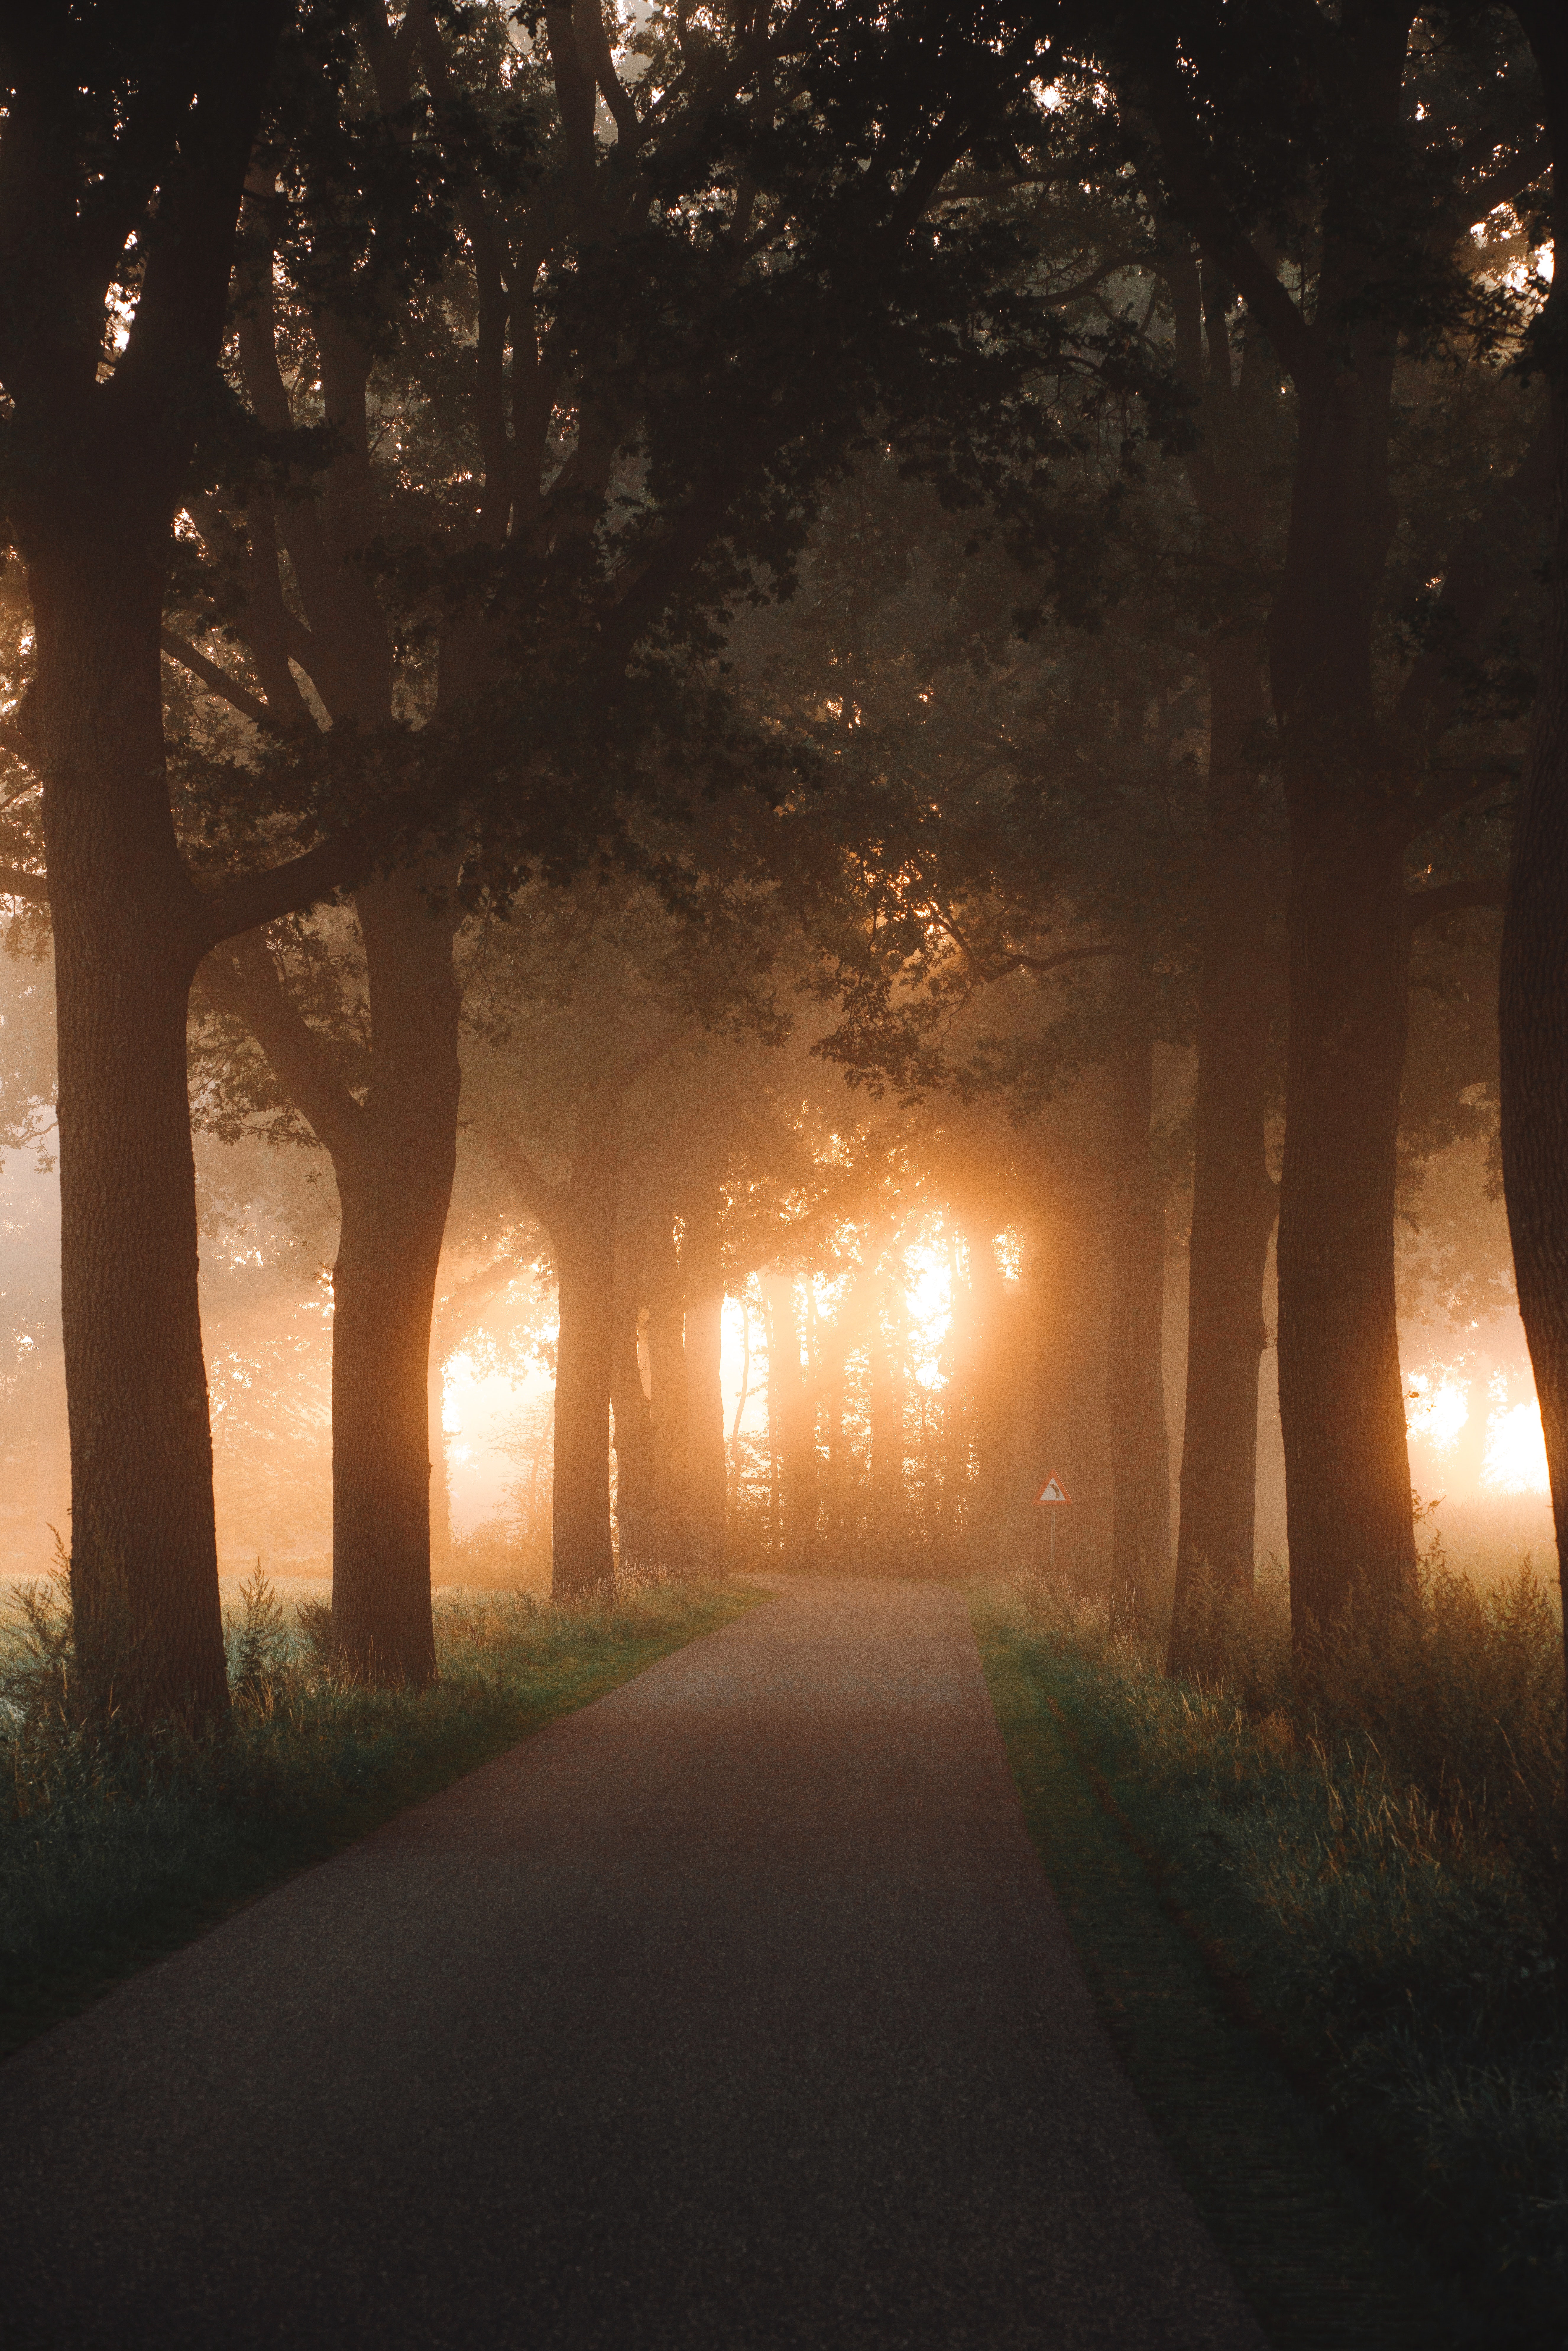 Windows Backgrounds alley, nature, trees, shine, light, beams, rays, road